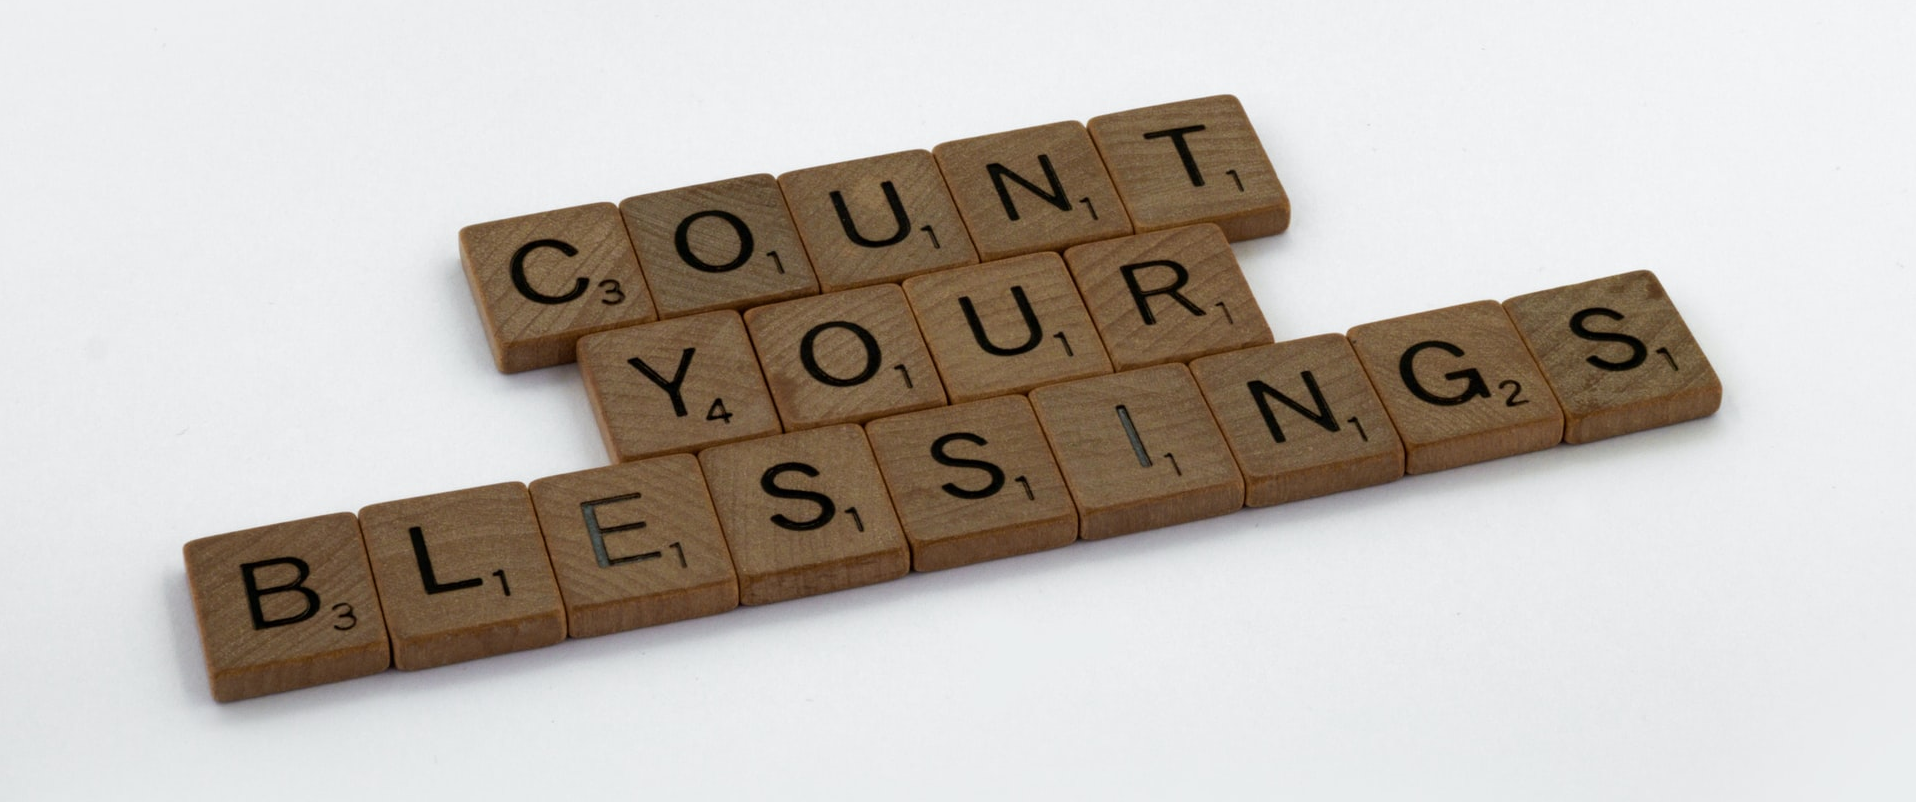 Count Your Blessings spelled out in Scrabble tiles